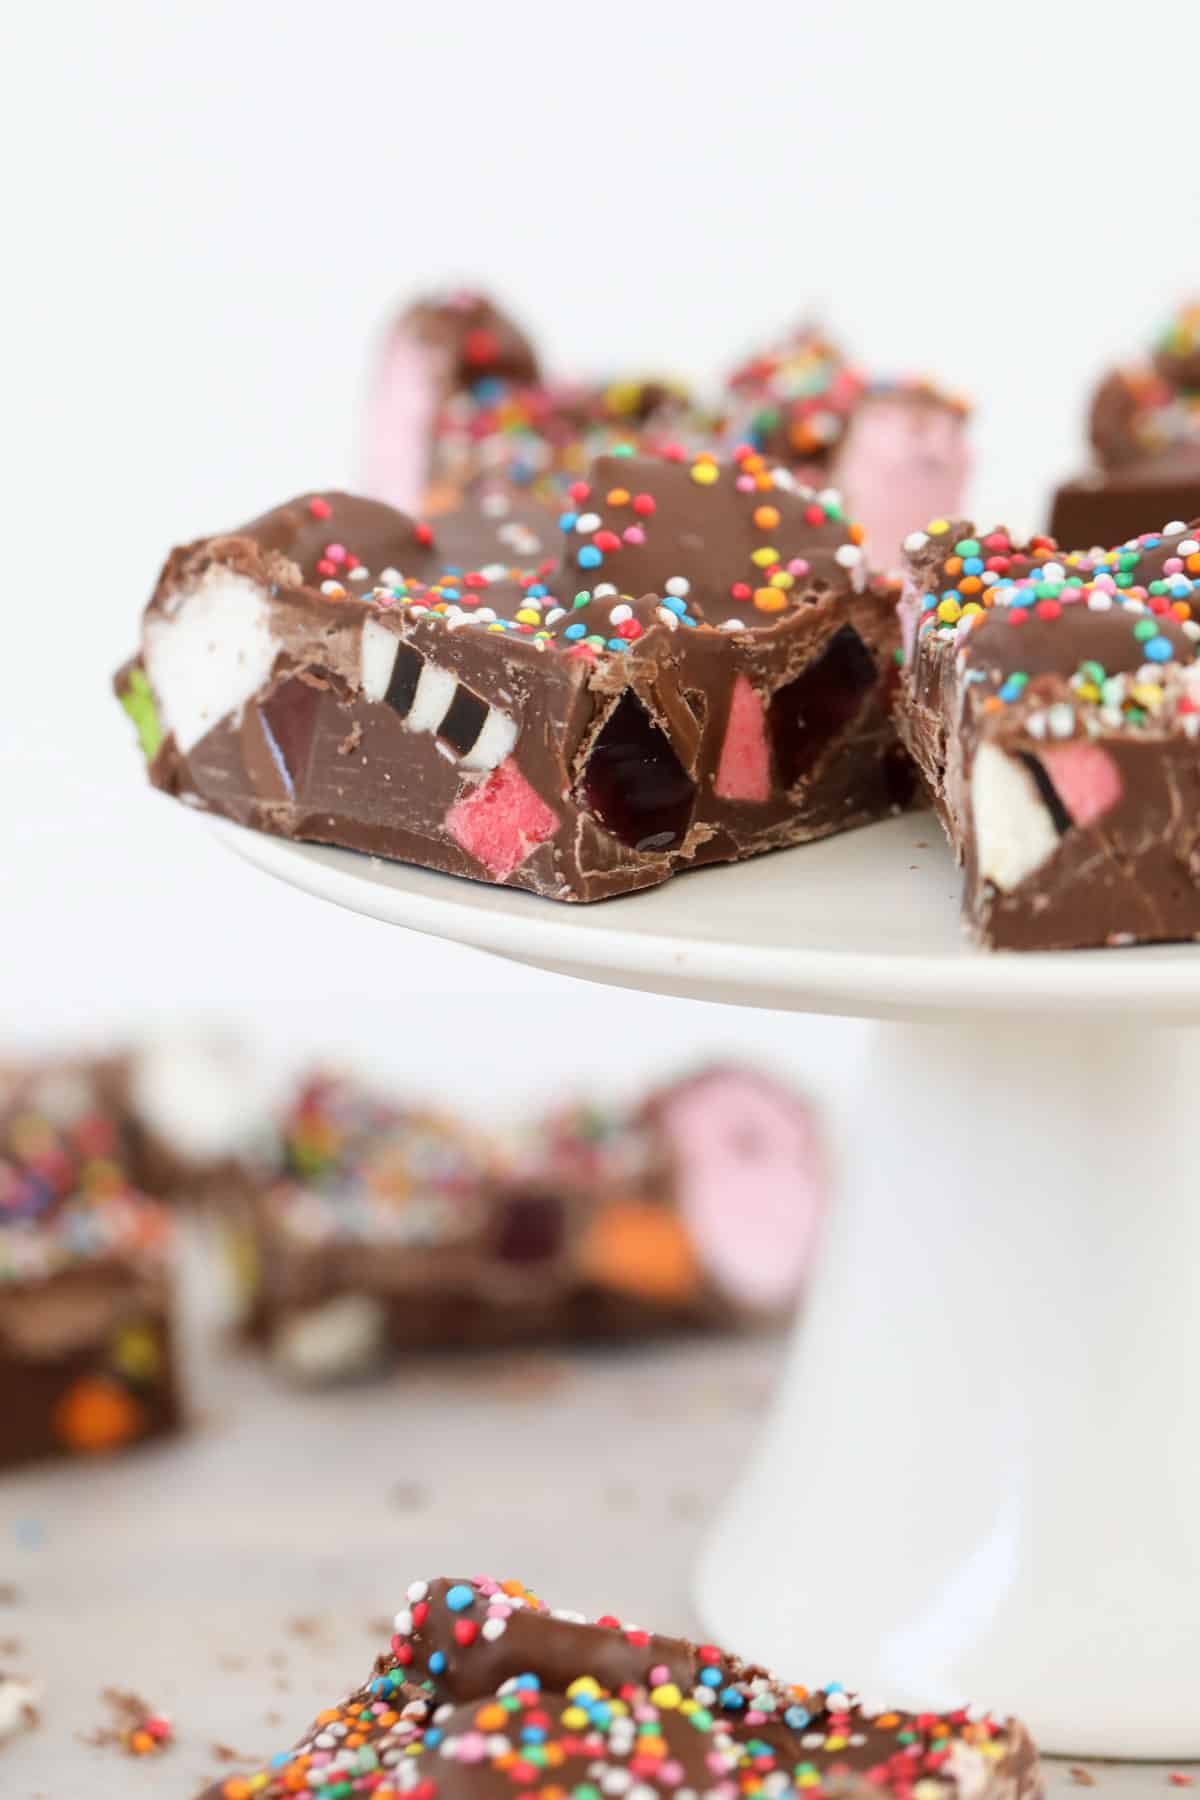 A cross section of licorice allsorts rocky road with sprinkles